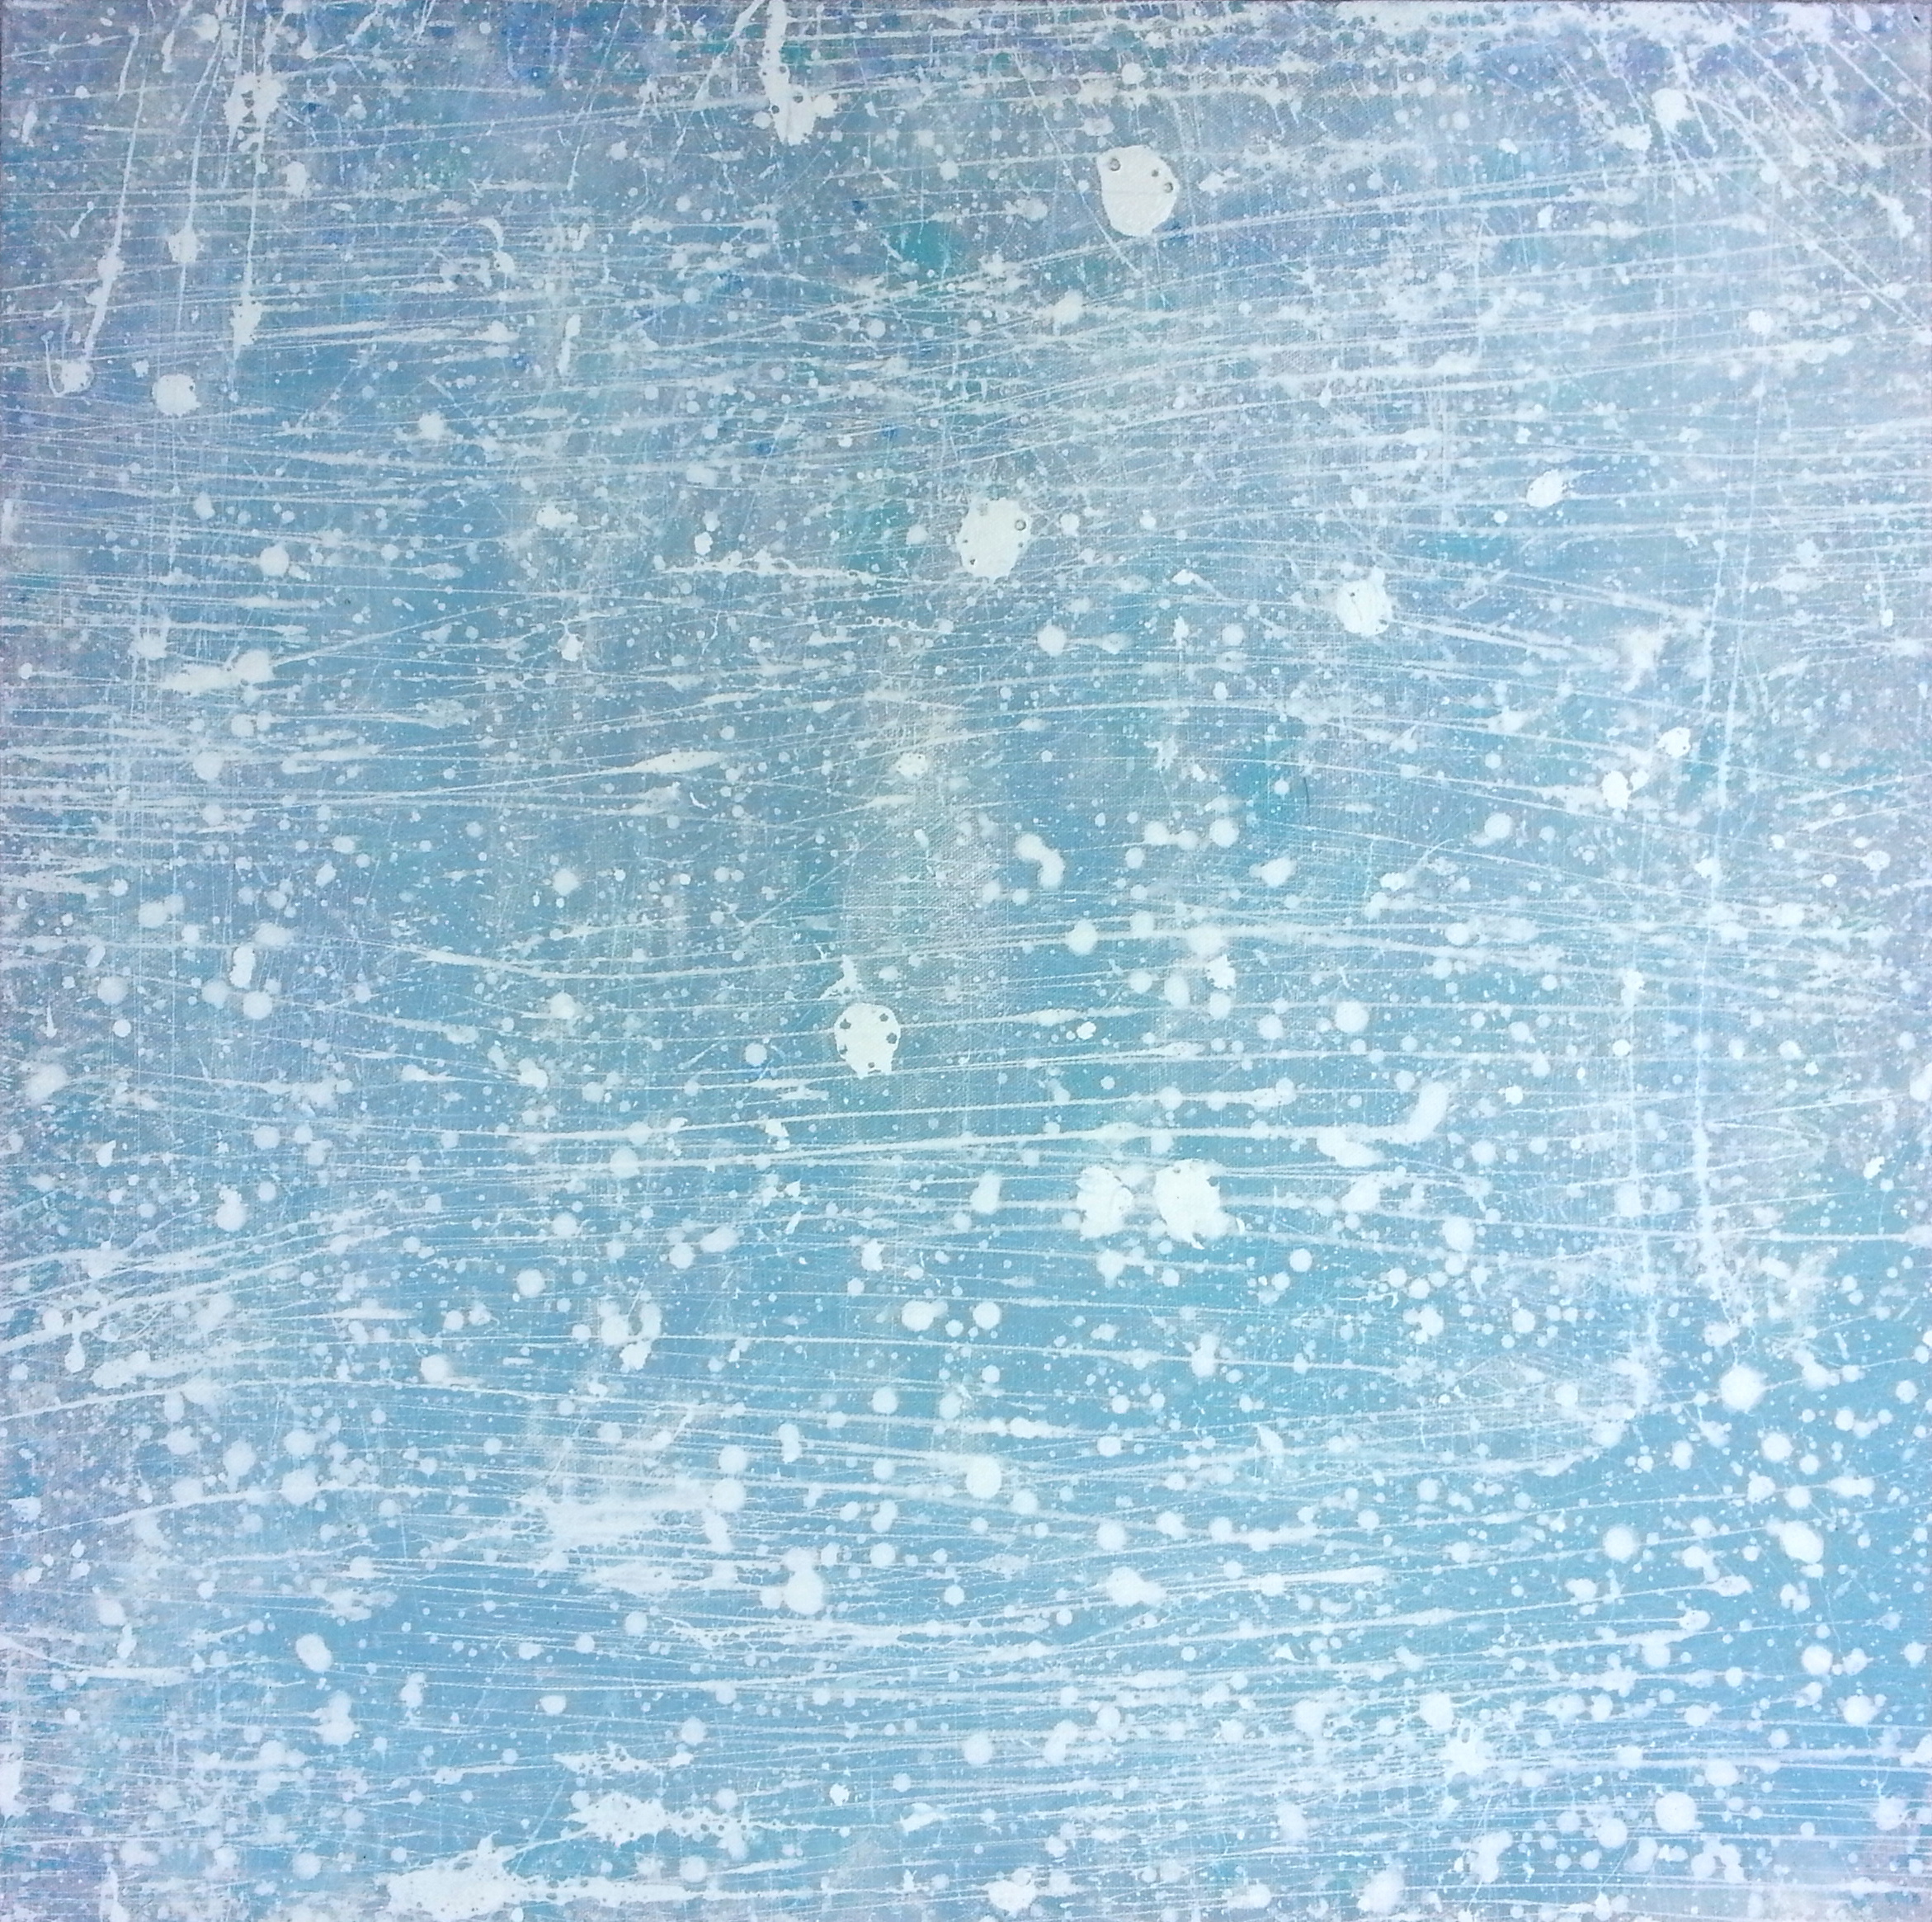  Sky Closeup 6, 2014 One of a series of nine canvases 24 x 24 inches Acrylic on canvas 